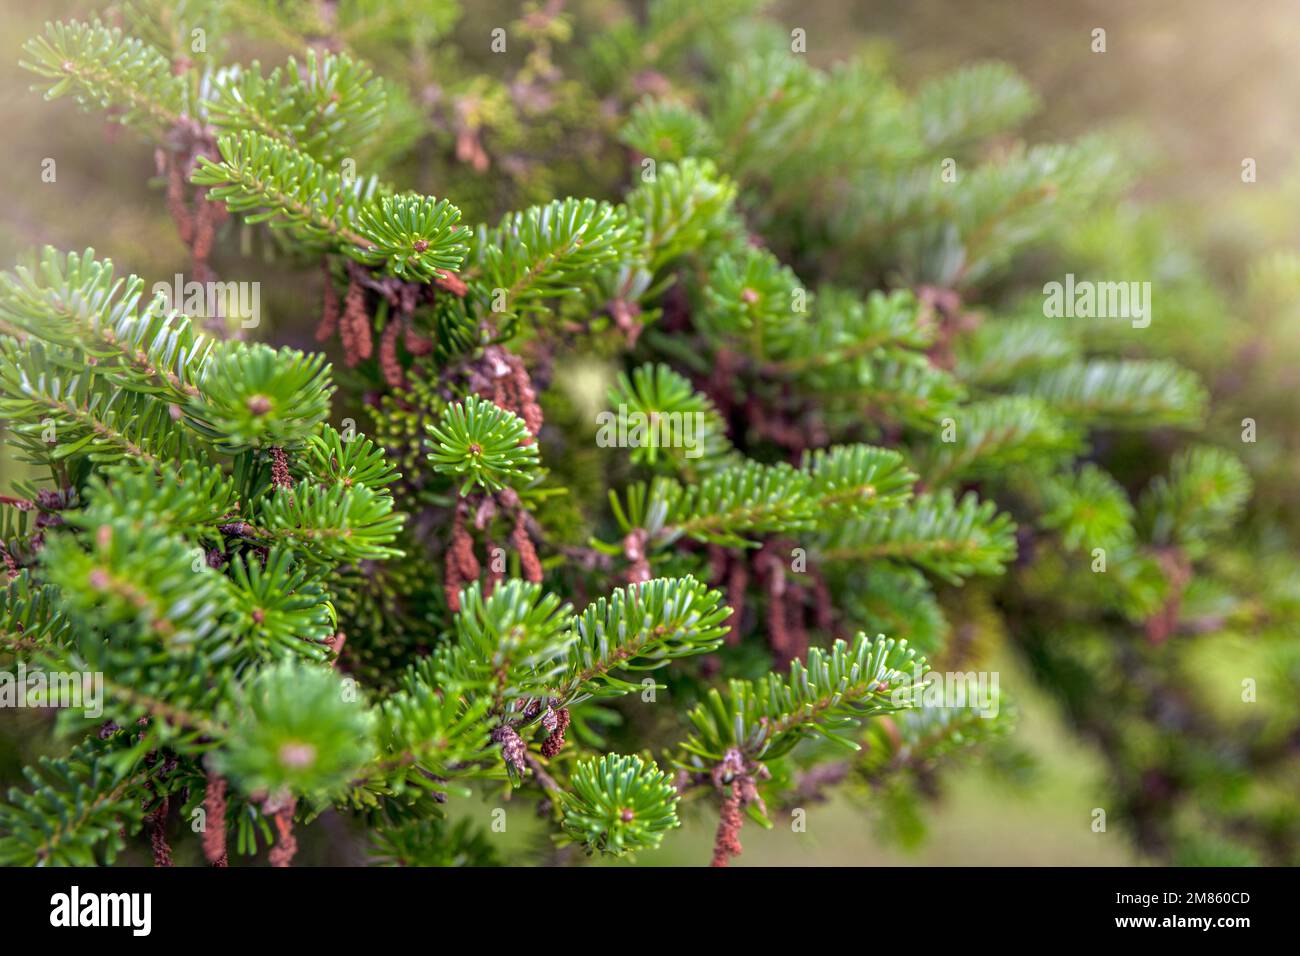 Christmas tree growing in the forest. Abies nordmanniana. Nordmann fir is one of the most important species grown for the Christmas tree. Stock Photo